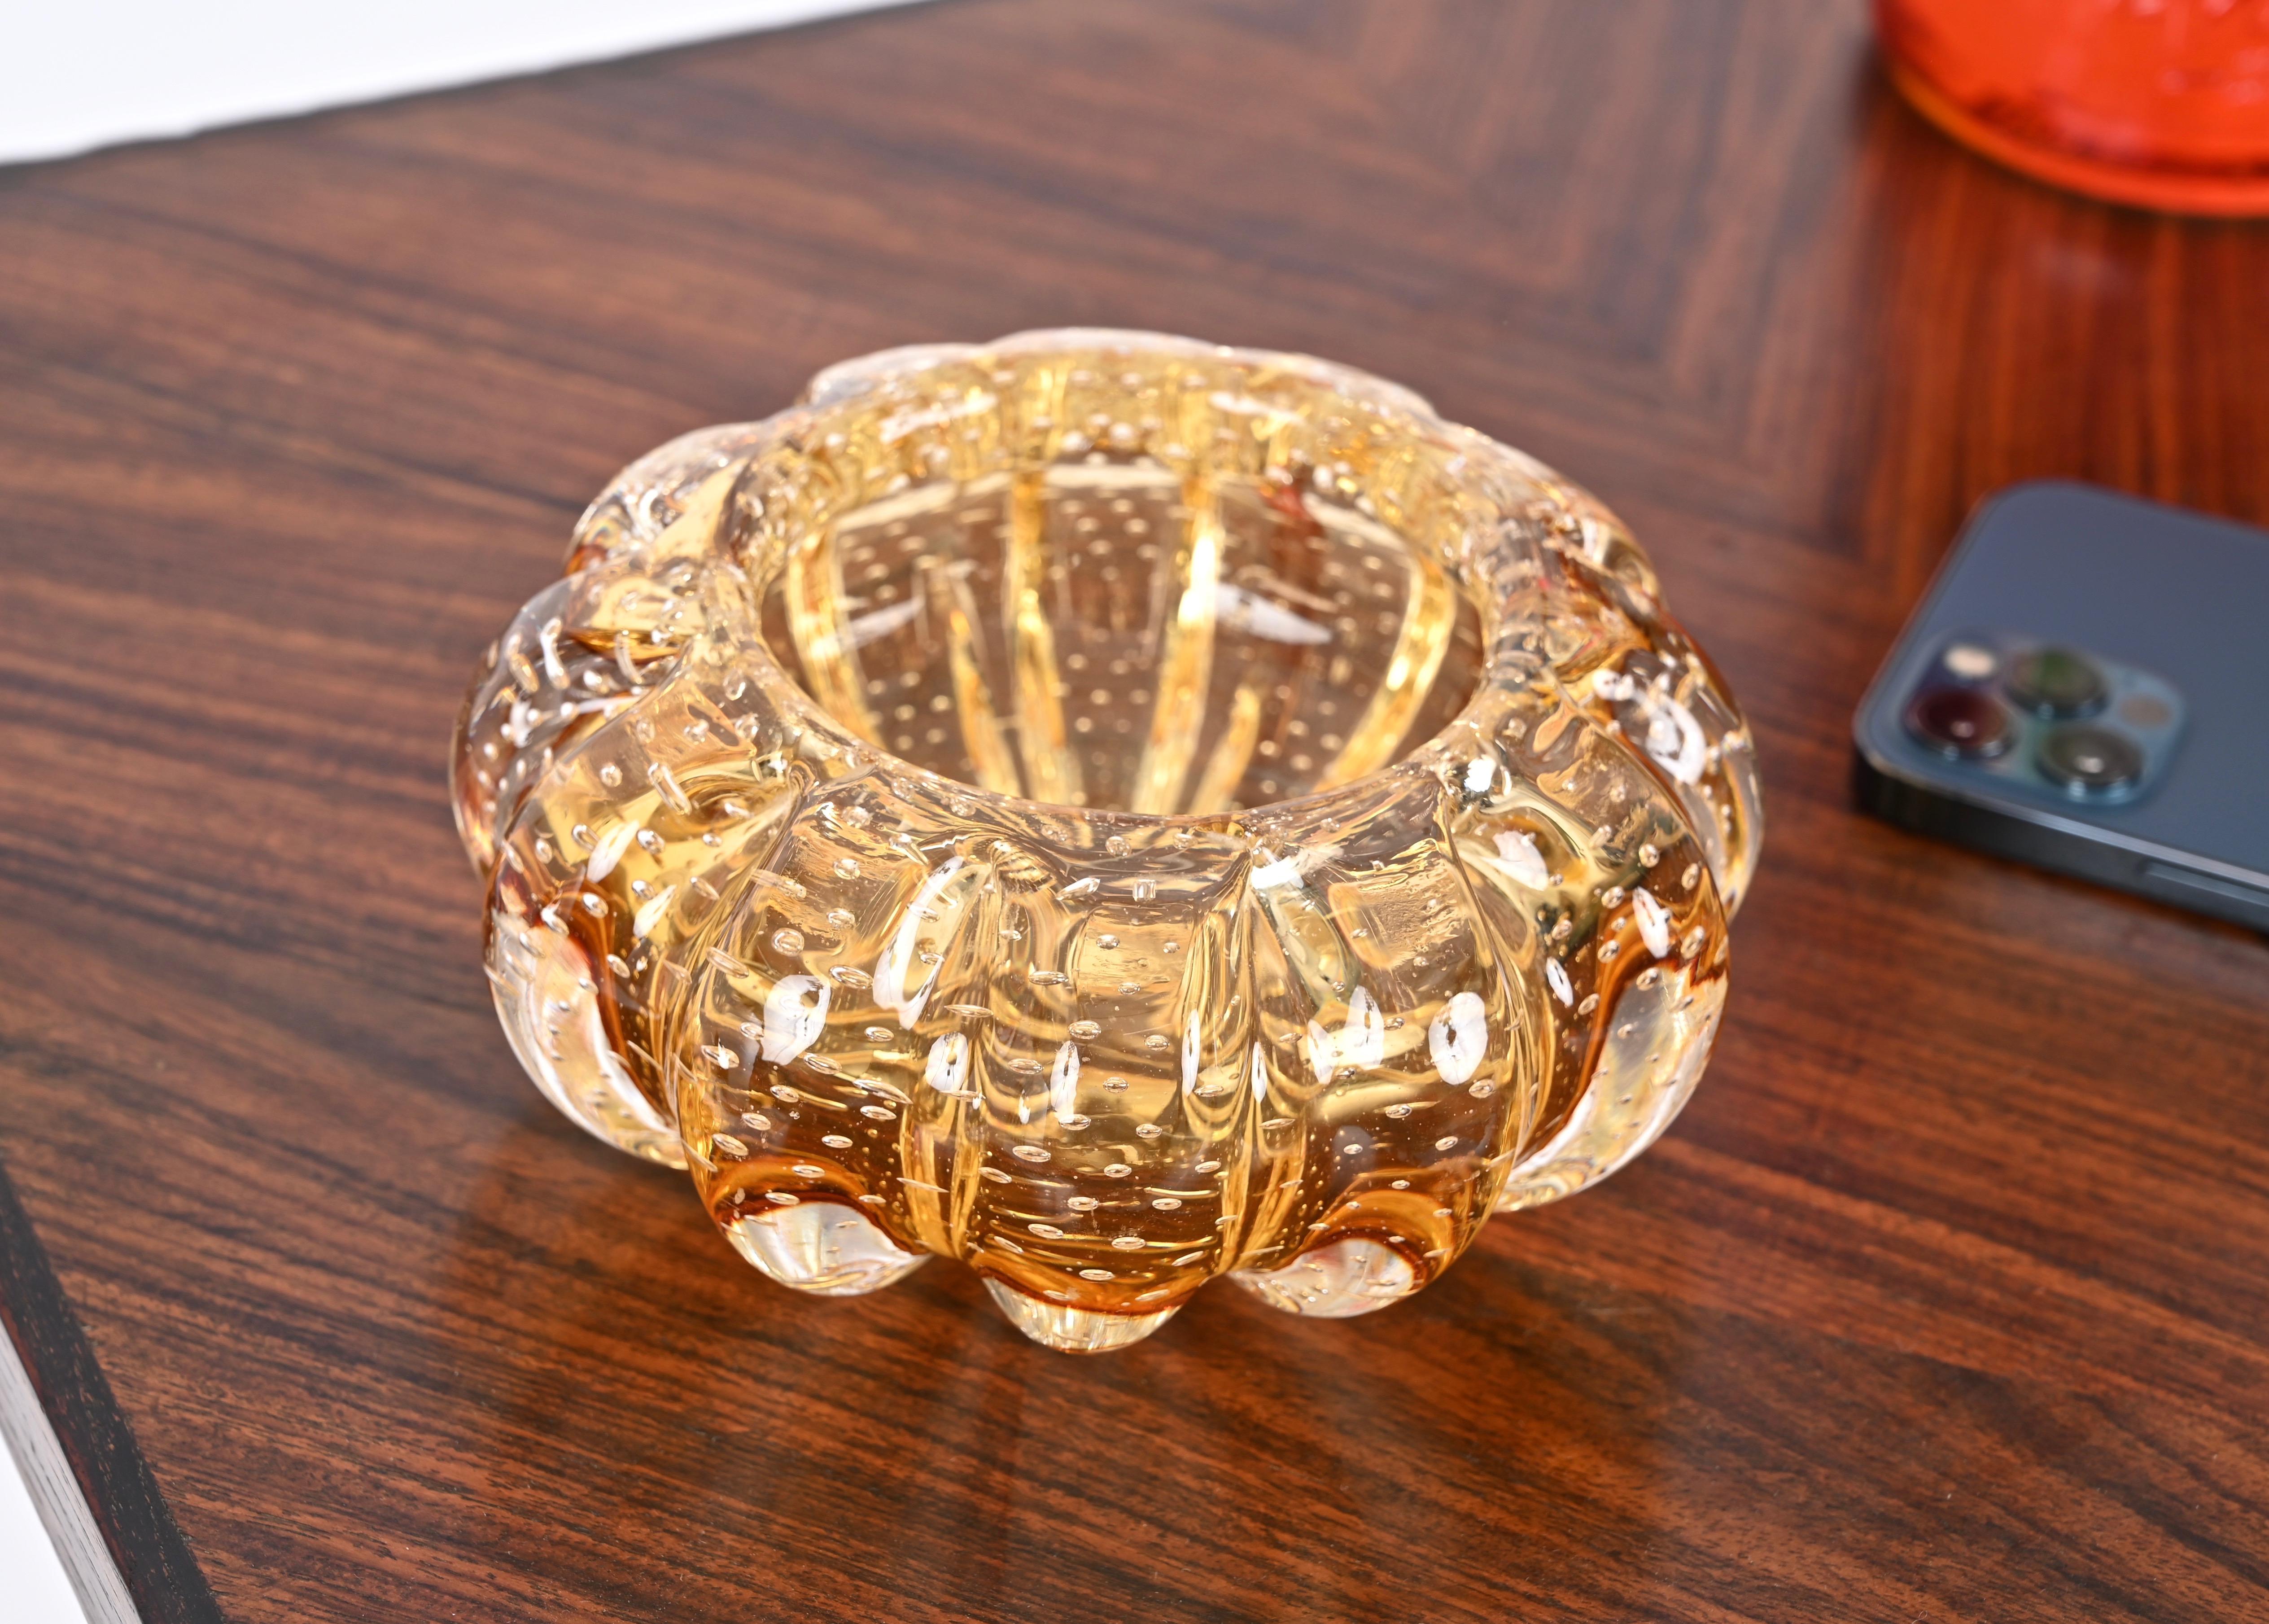 Delightful round bowl or ashtray made in a stunning multicolor amber  Murano glass using the 